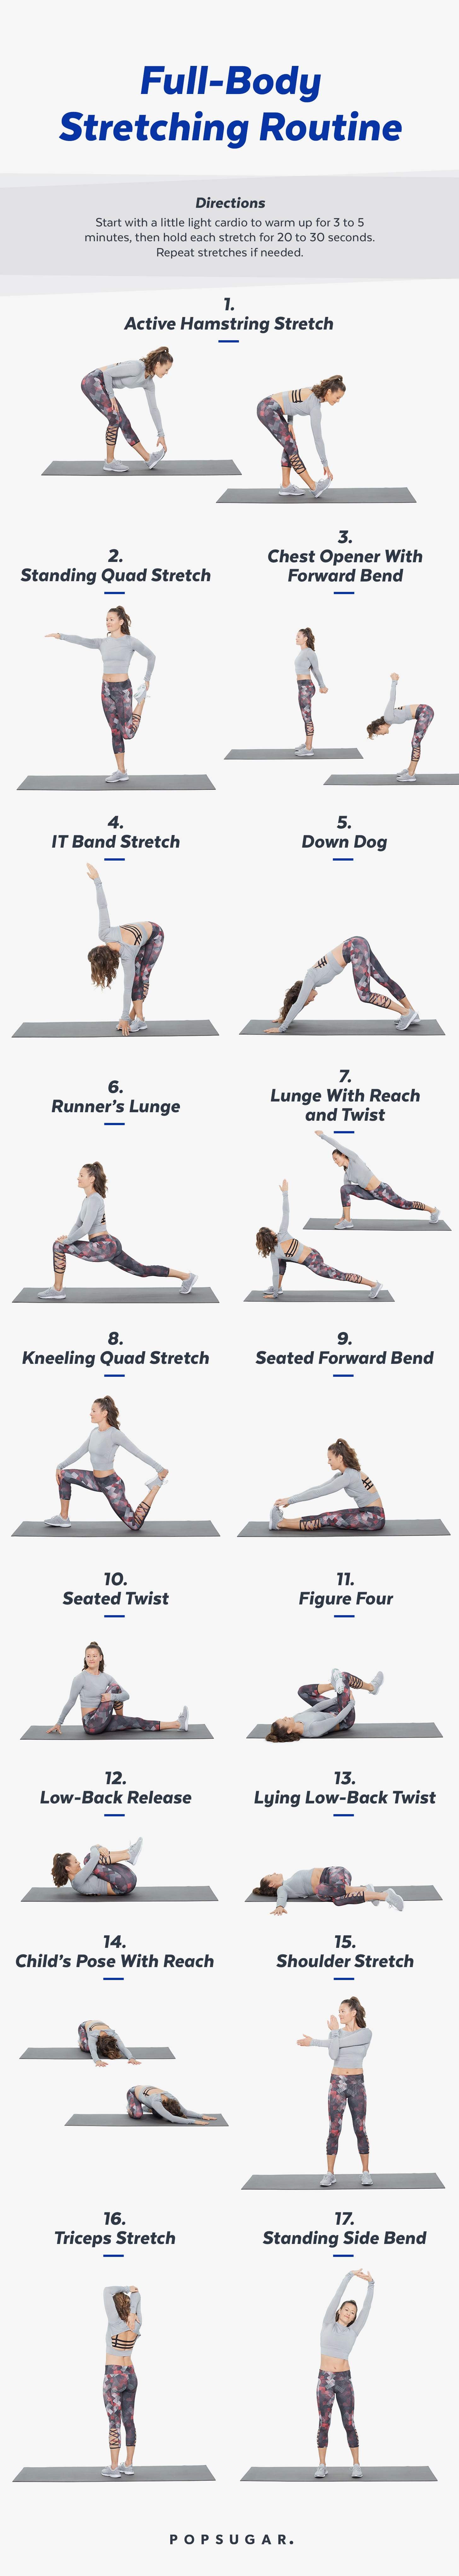 Lower Back Stretches Chart